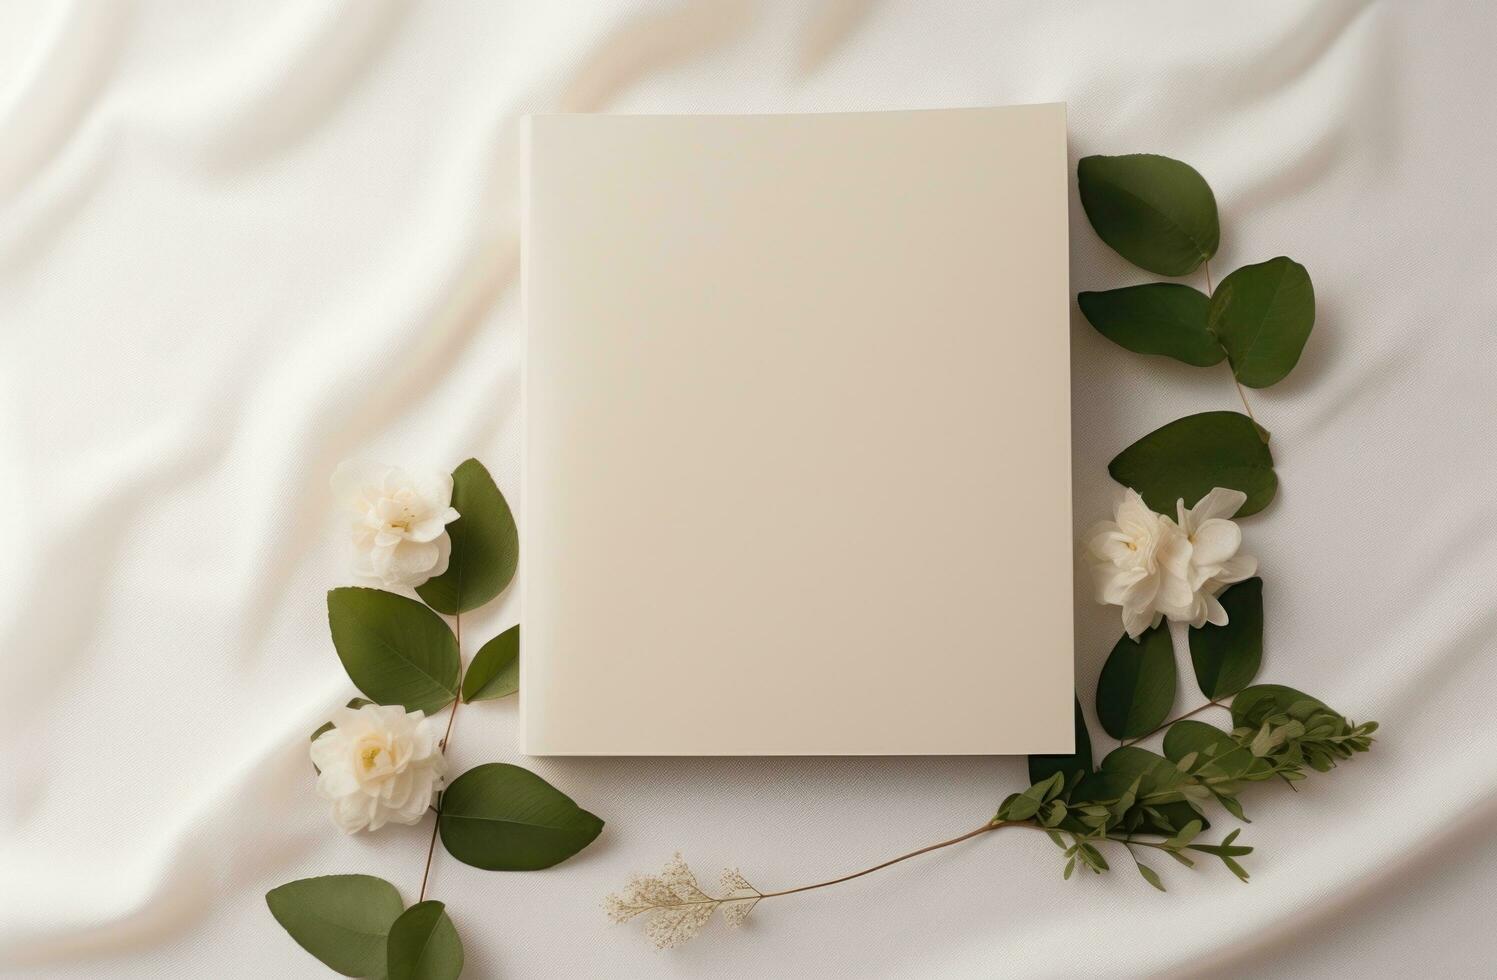 AI generated a white blank book surrounded by green leaves photo